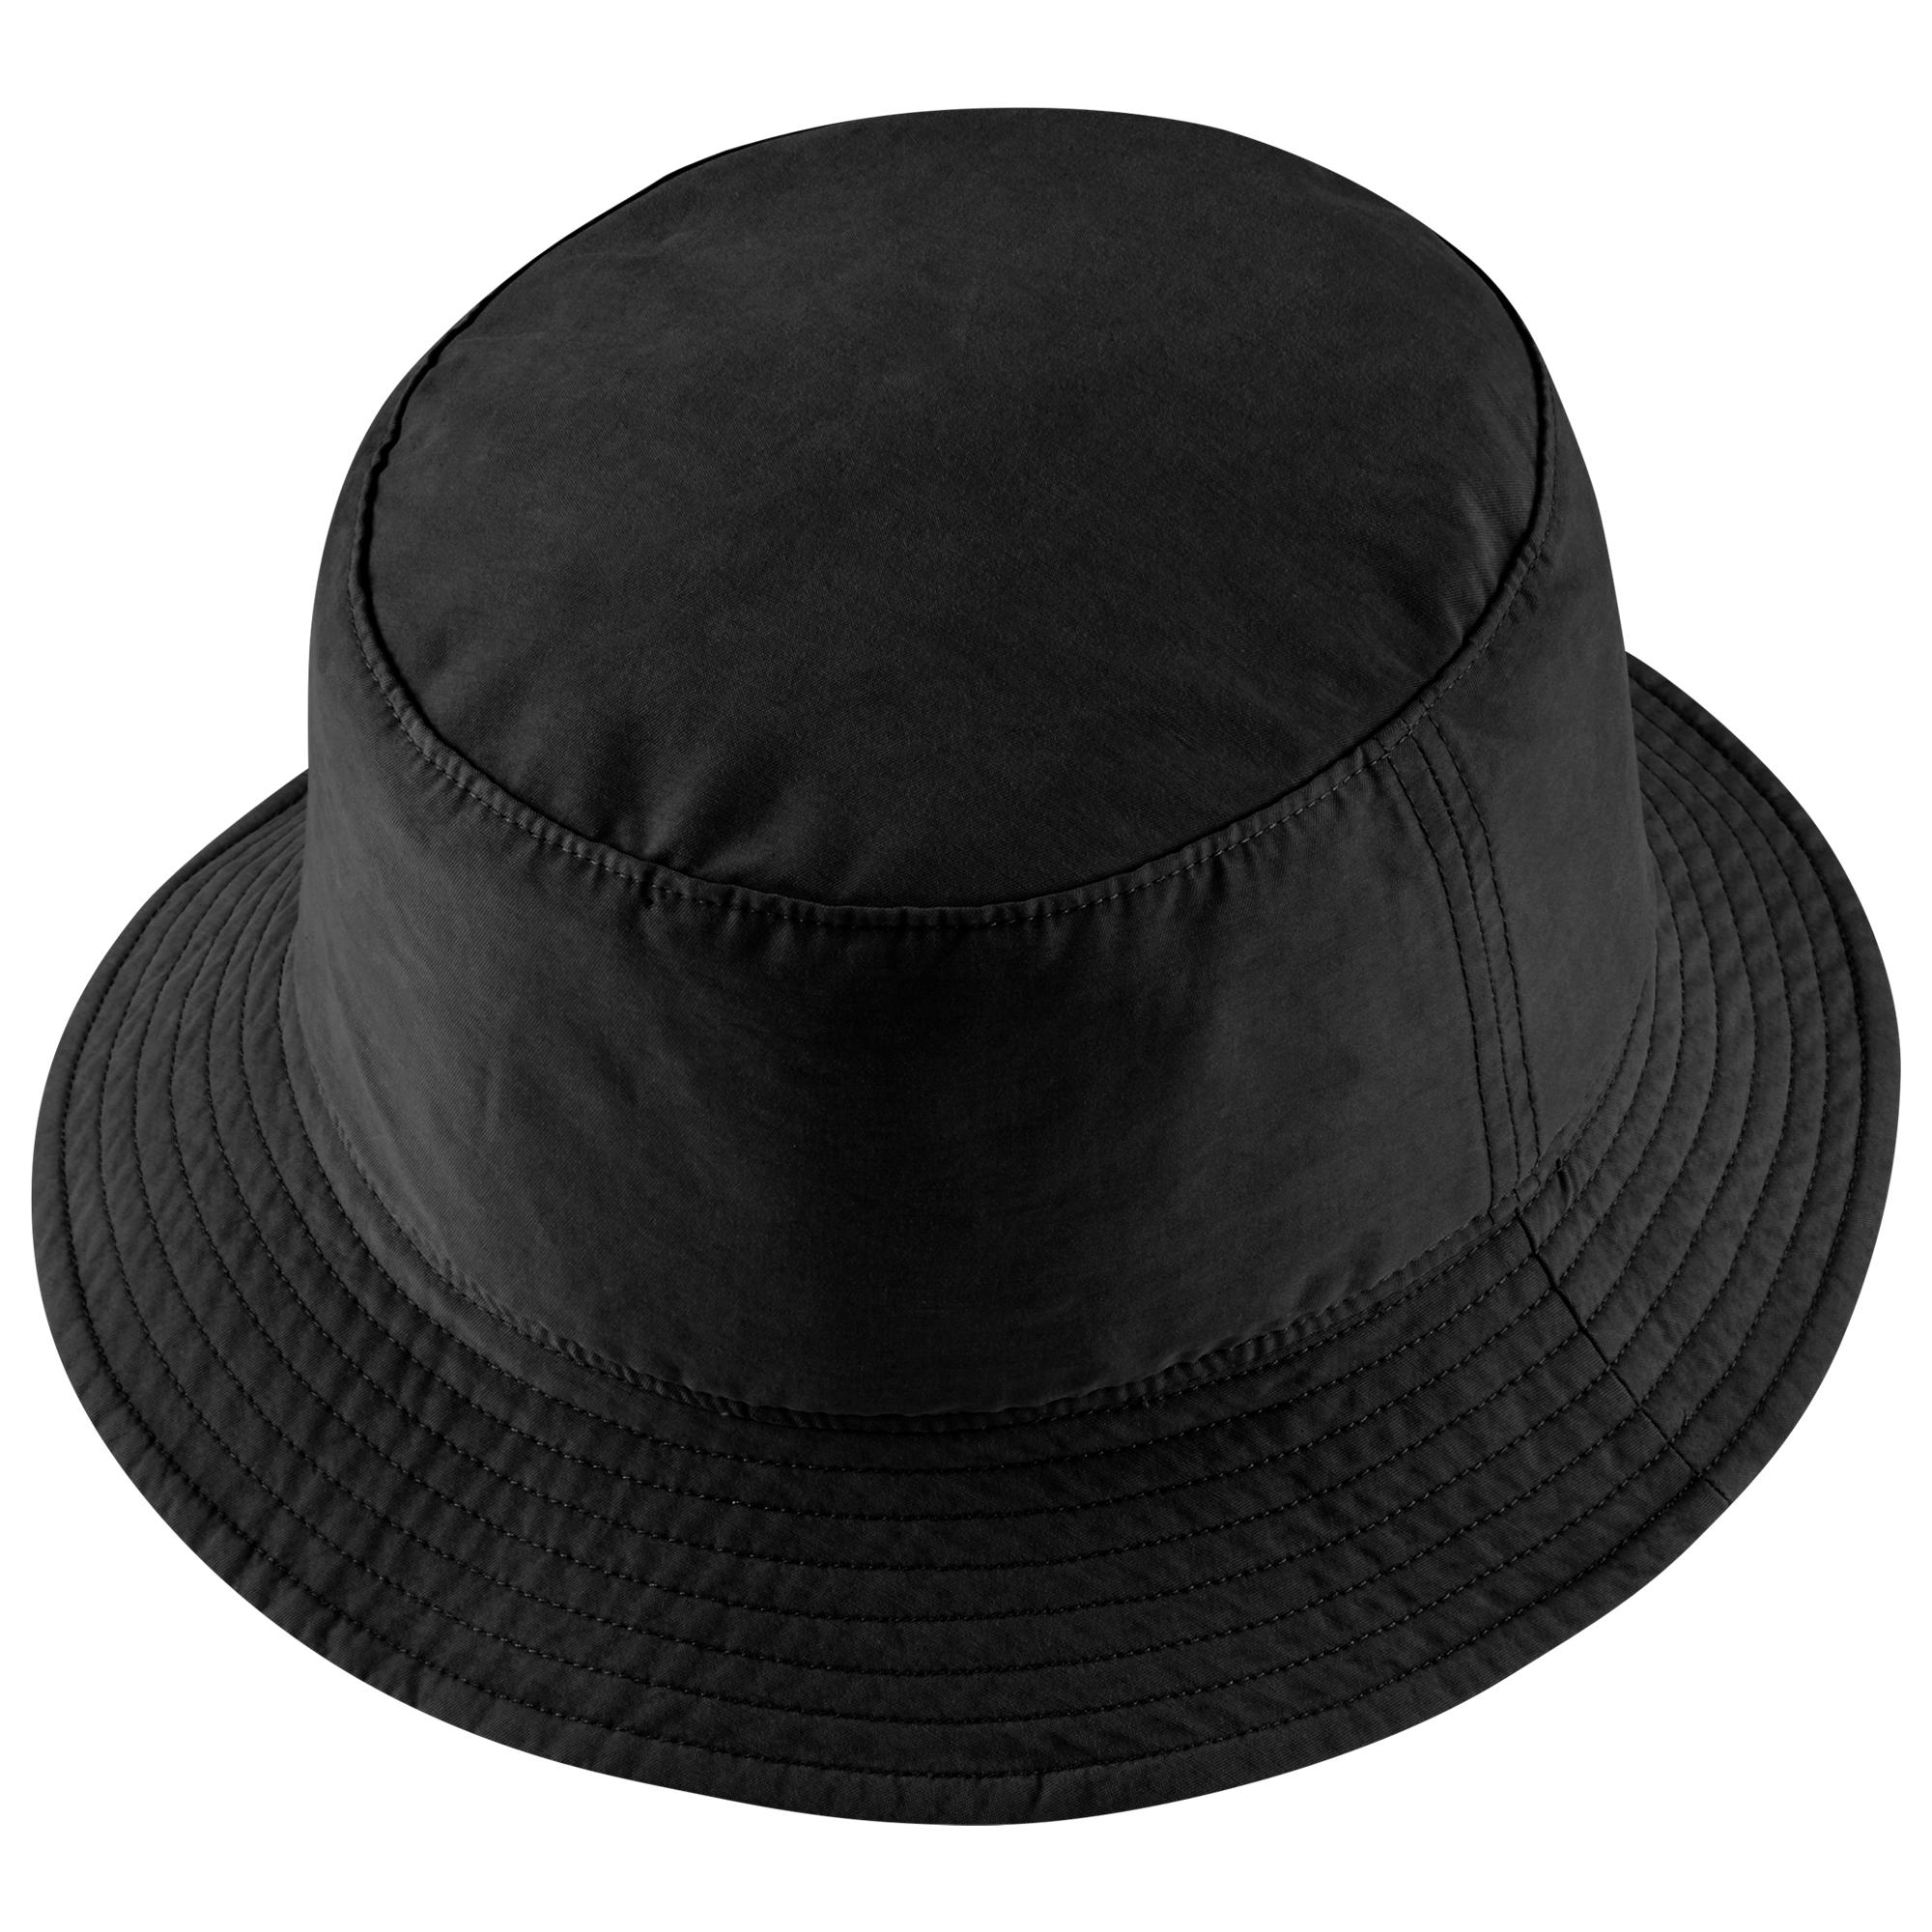 Nike Cotton Washed Bucket Hat in Black for Men - Lyst